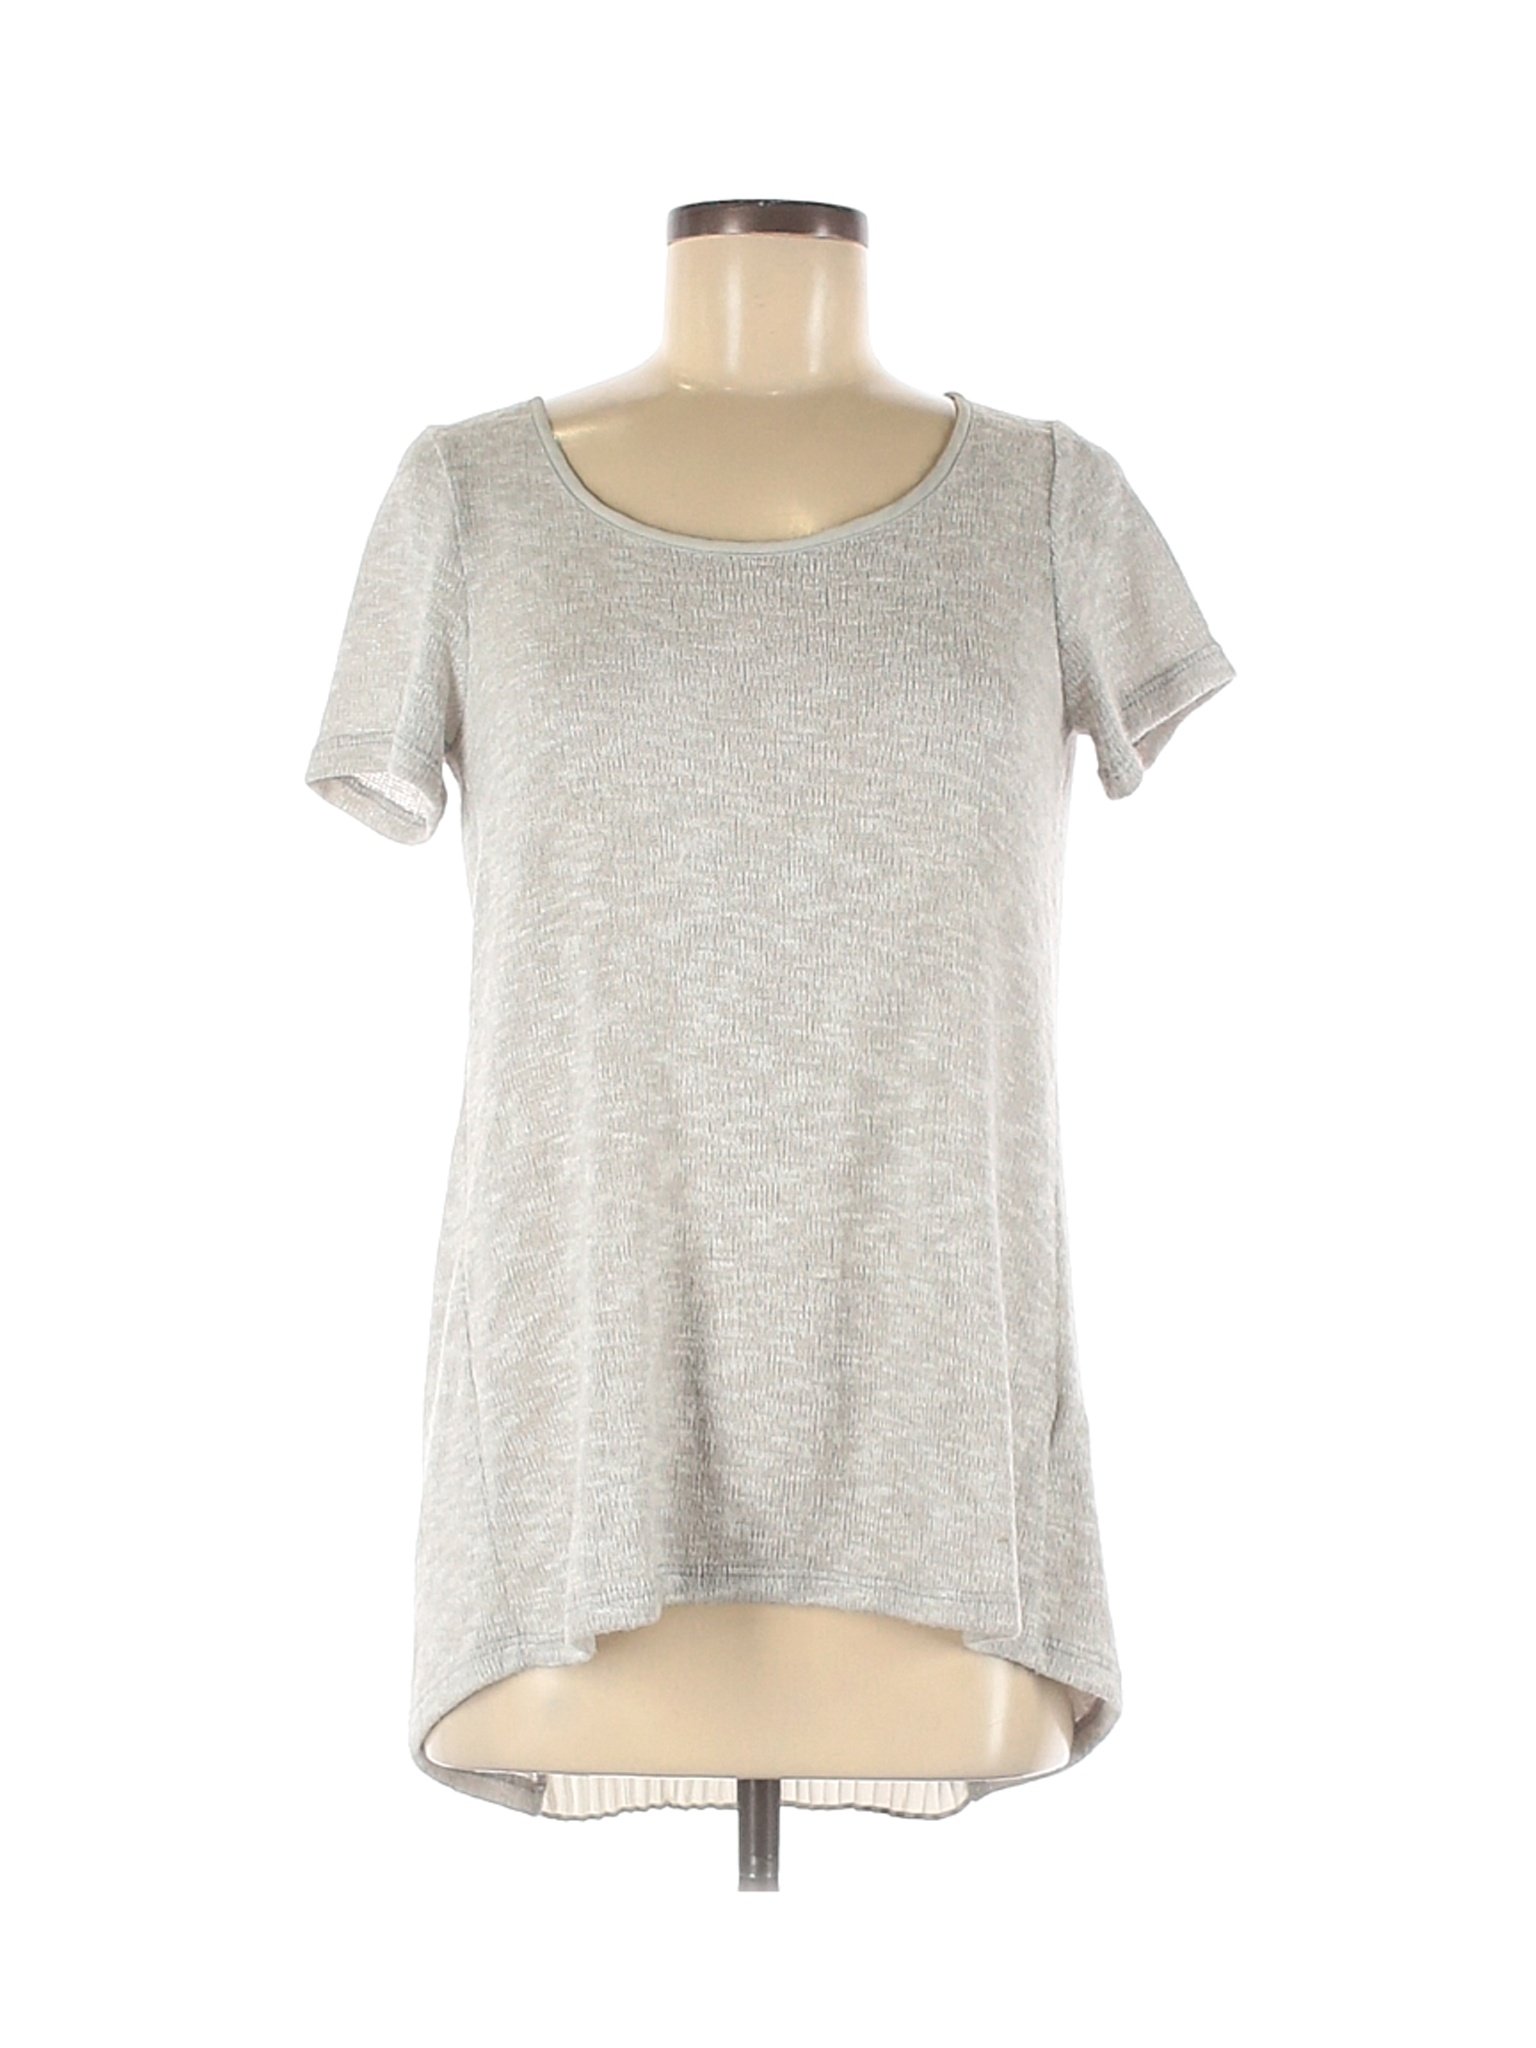 Casual Couture by Green Envelope Women Gray Short Sleeve Top M | eBay